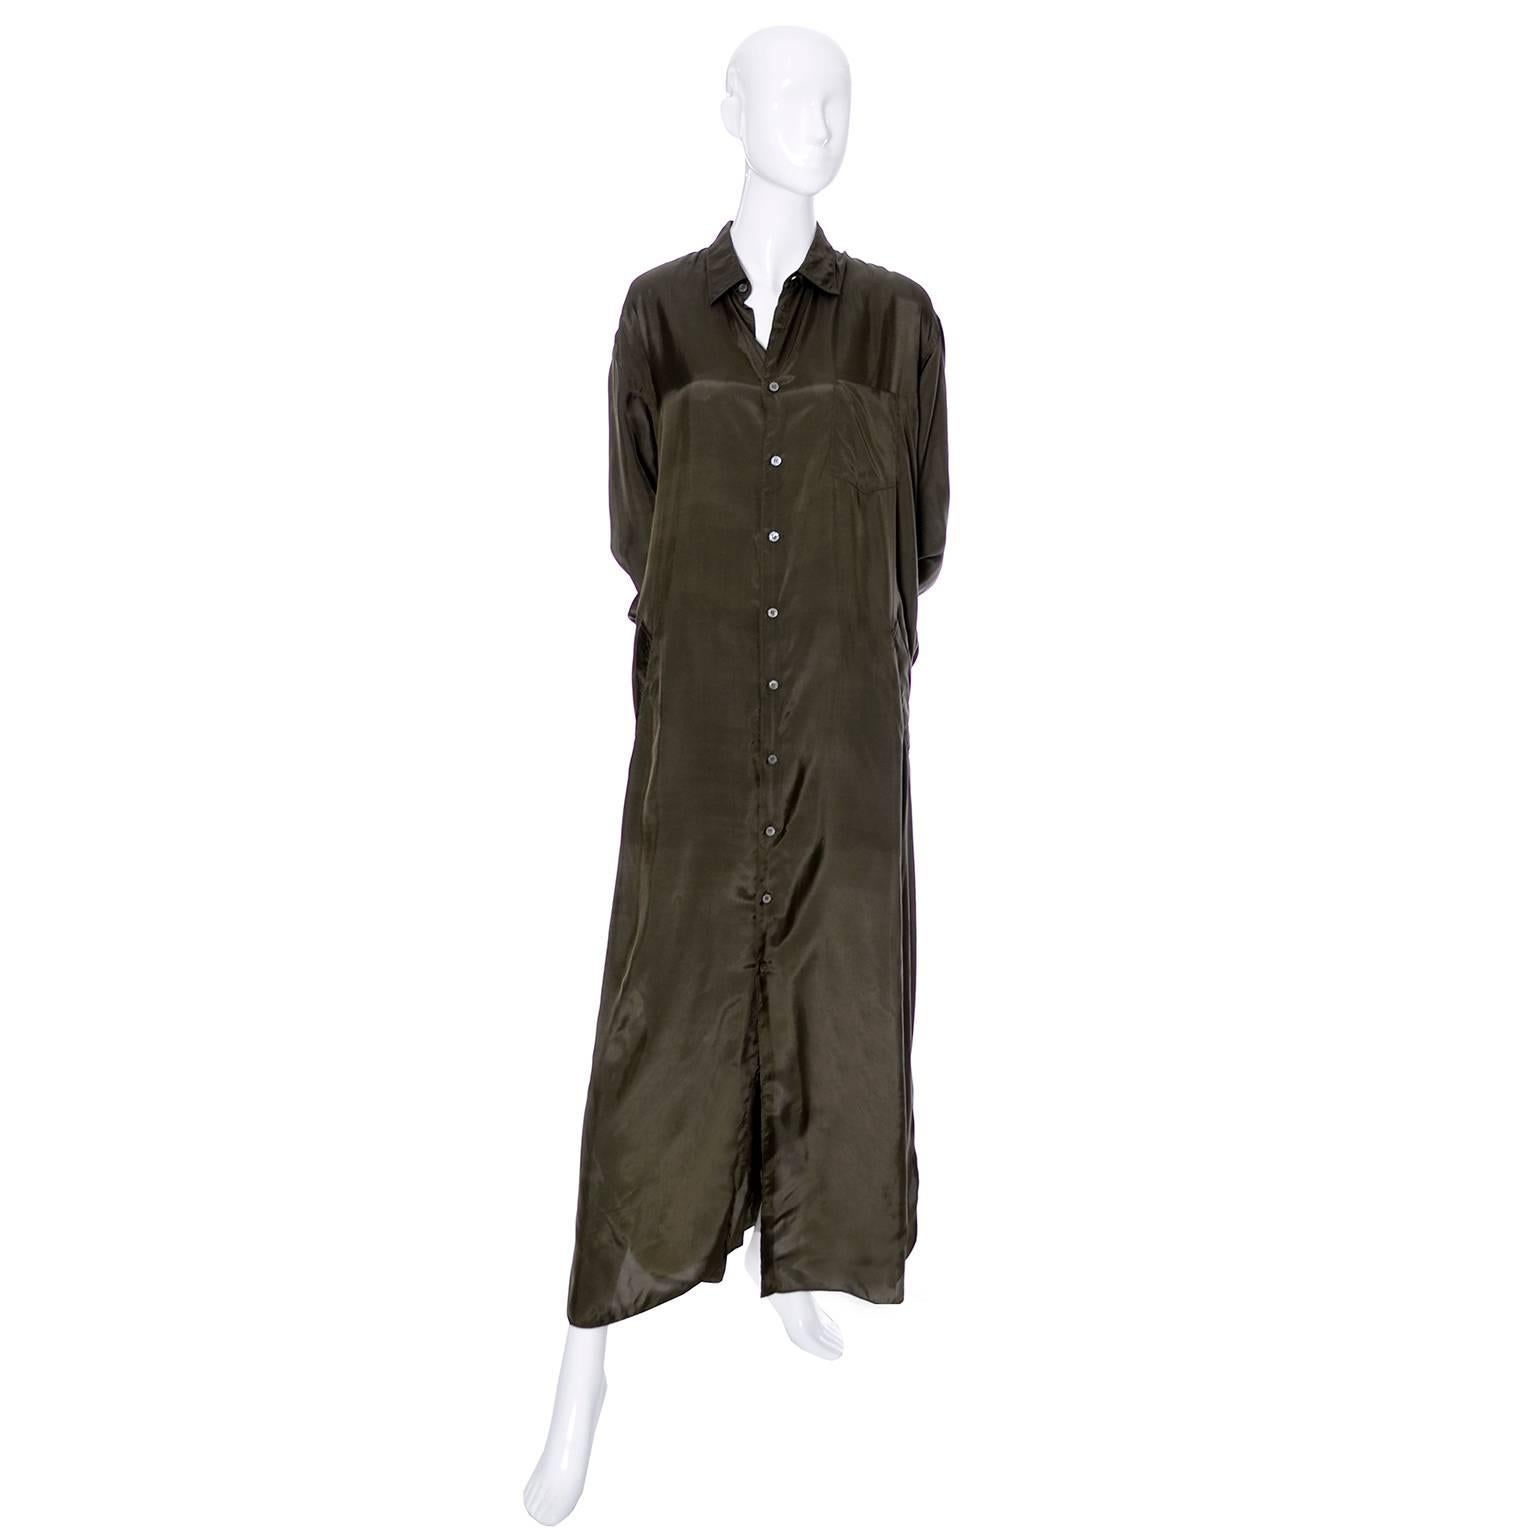 This is a deep olive or army green rayon shirtdress style maxi dress from Comme des Garcons. This vintage piece could be worn as a long coat or a dress, it is in excellent condition and has a lapel pocket as well as front side slit pockets.  You can